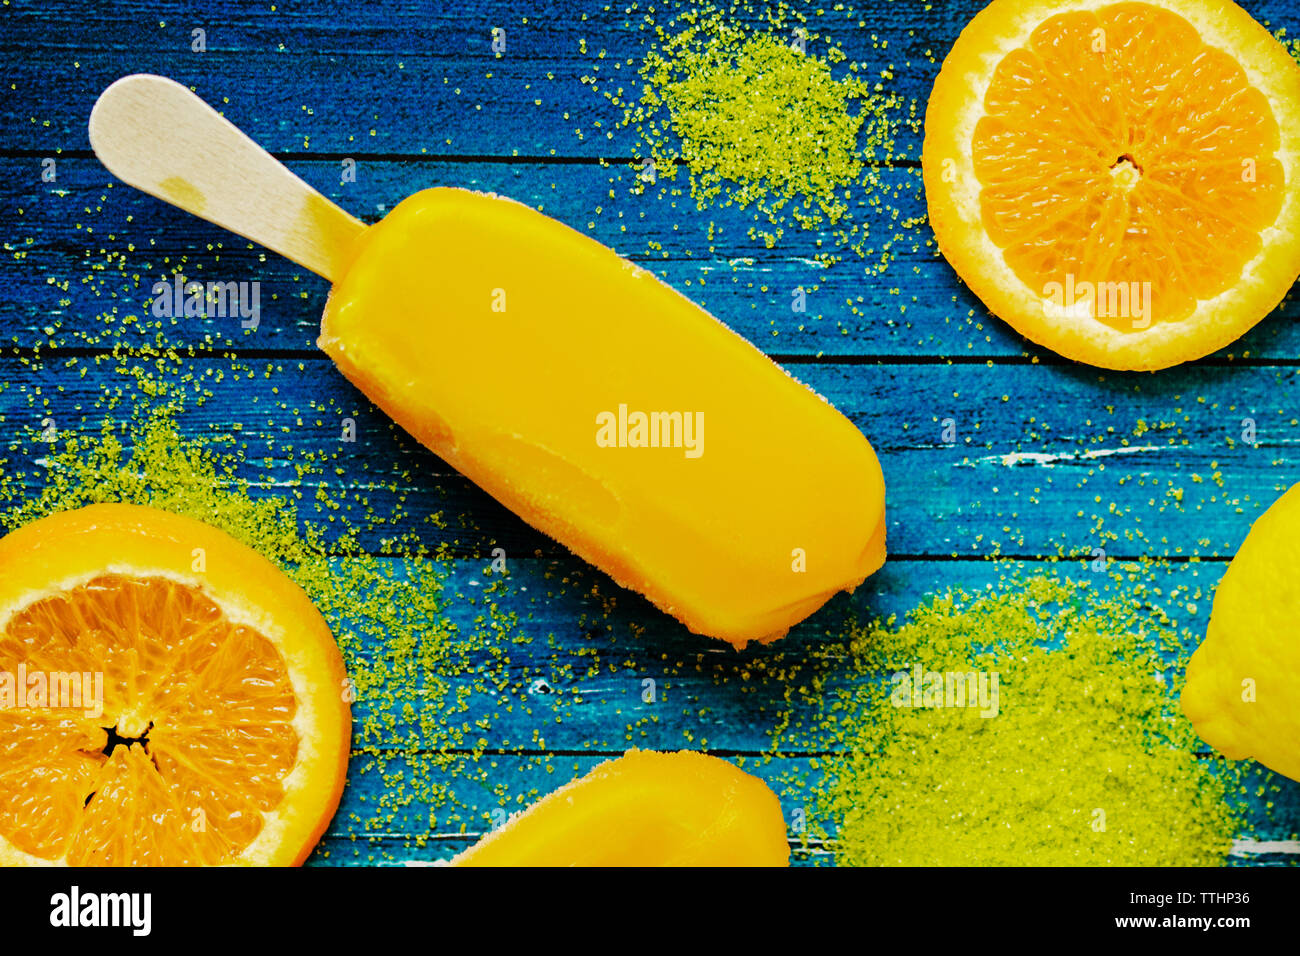 Overhead view of popsicle by orange slices and powder on table Stock Photo